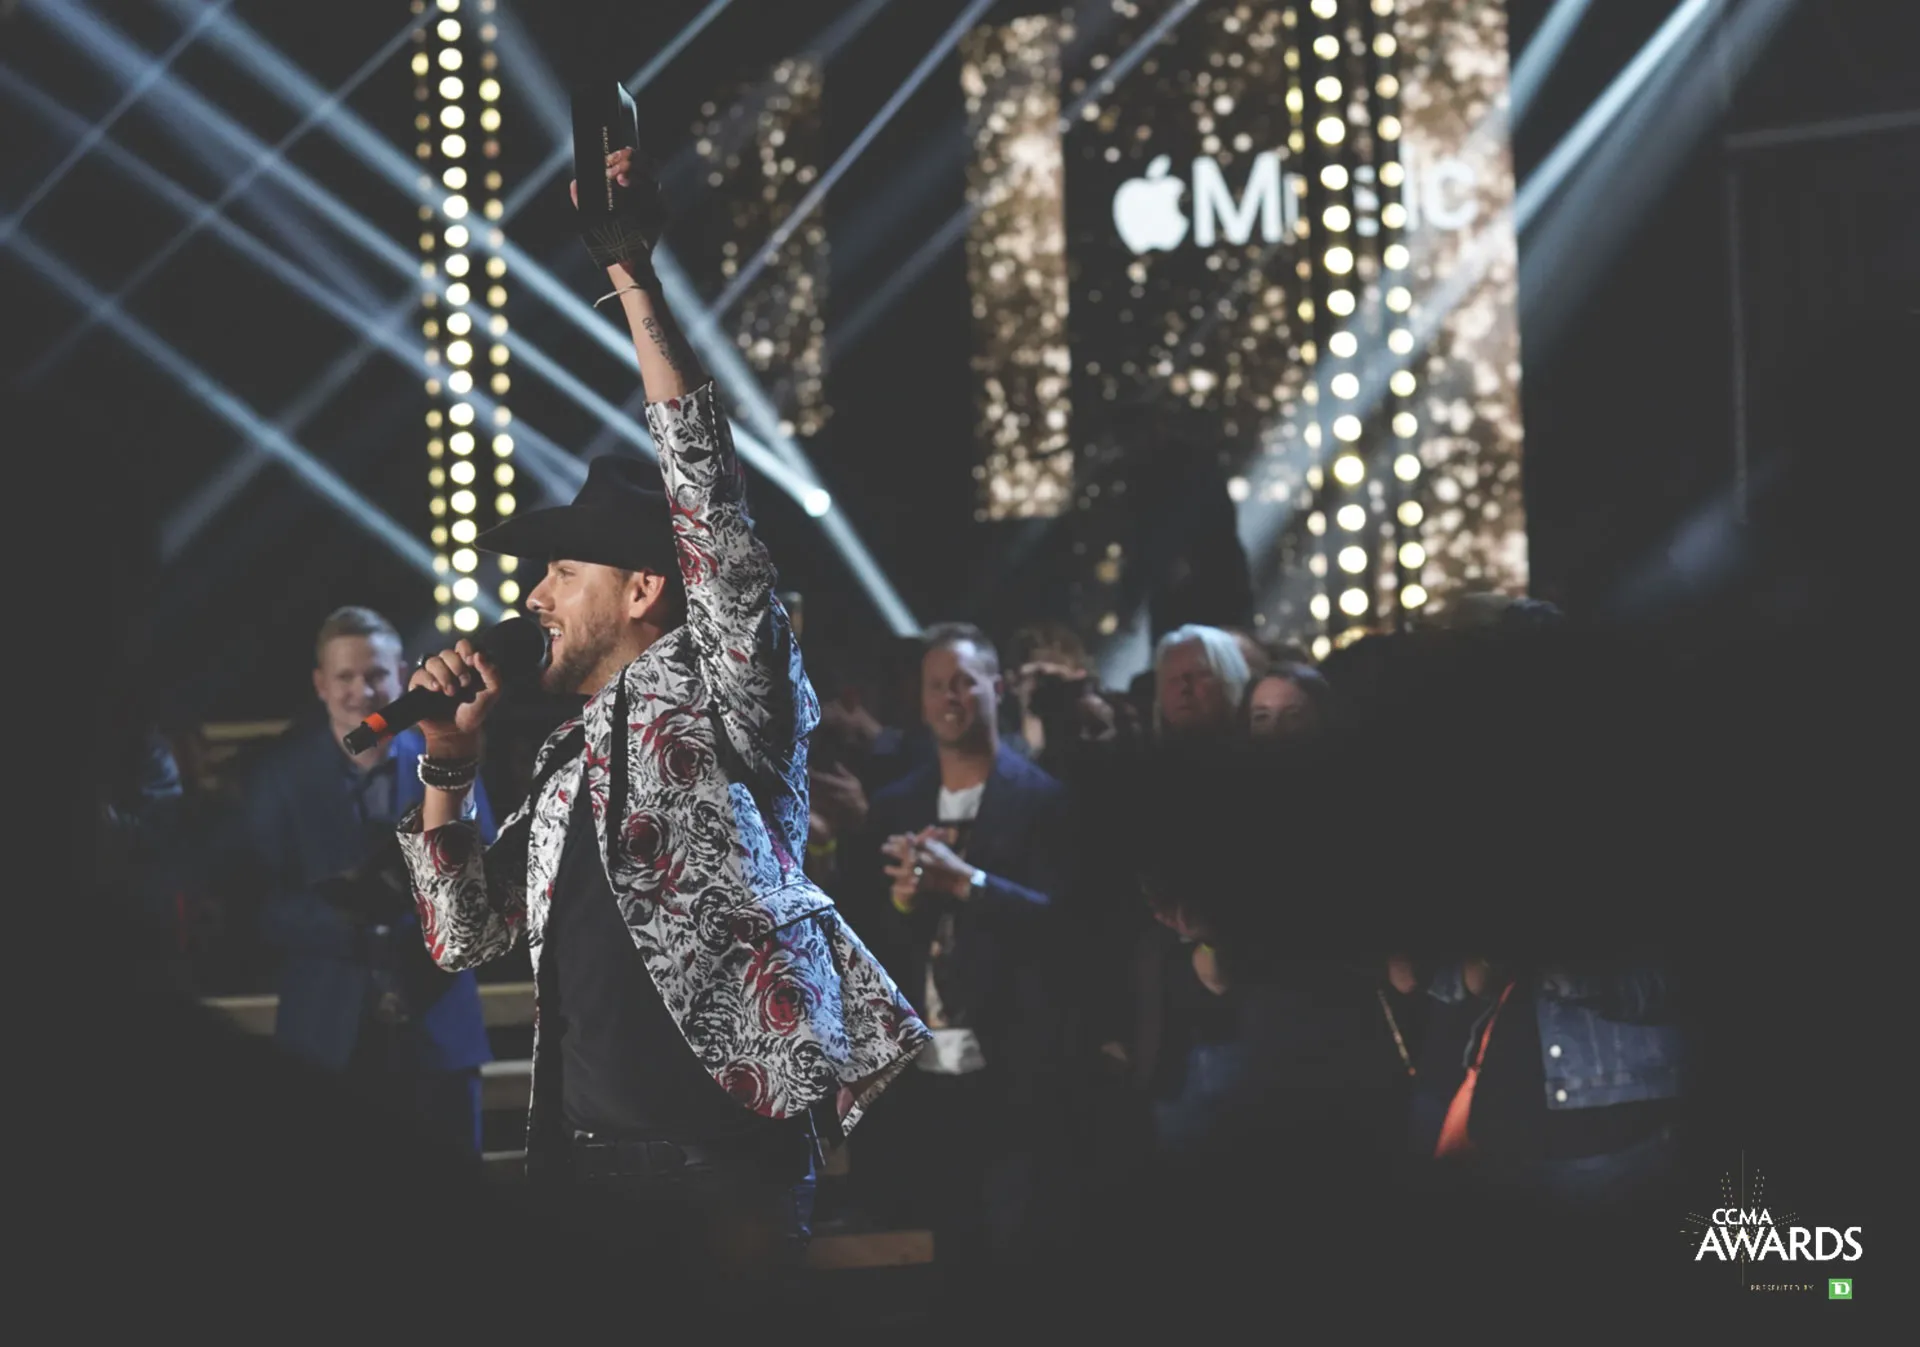 Brett Kissel at the 2019 Canadian Country Music Awards in Calgary.